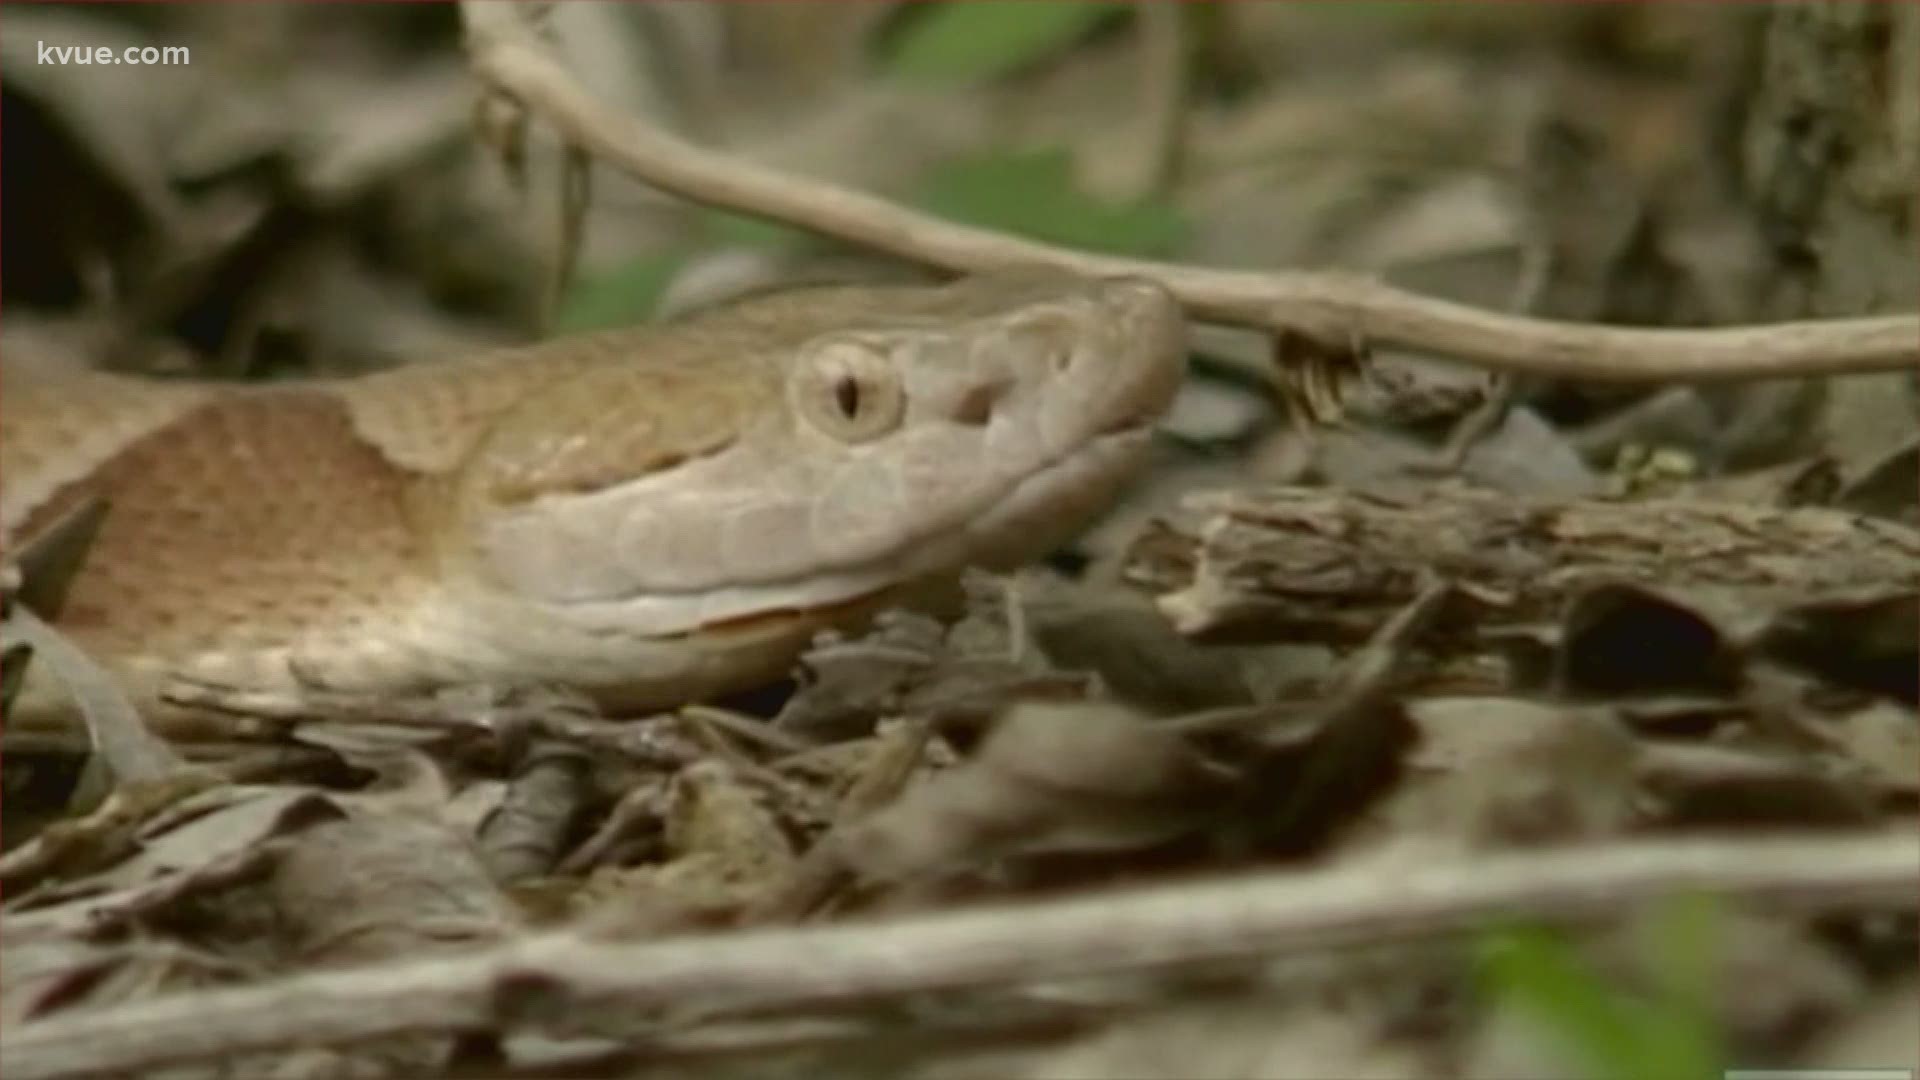 Beware of snakes! Springtime in Central Texas brings out slithering  serpents 